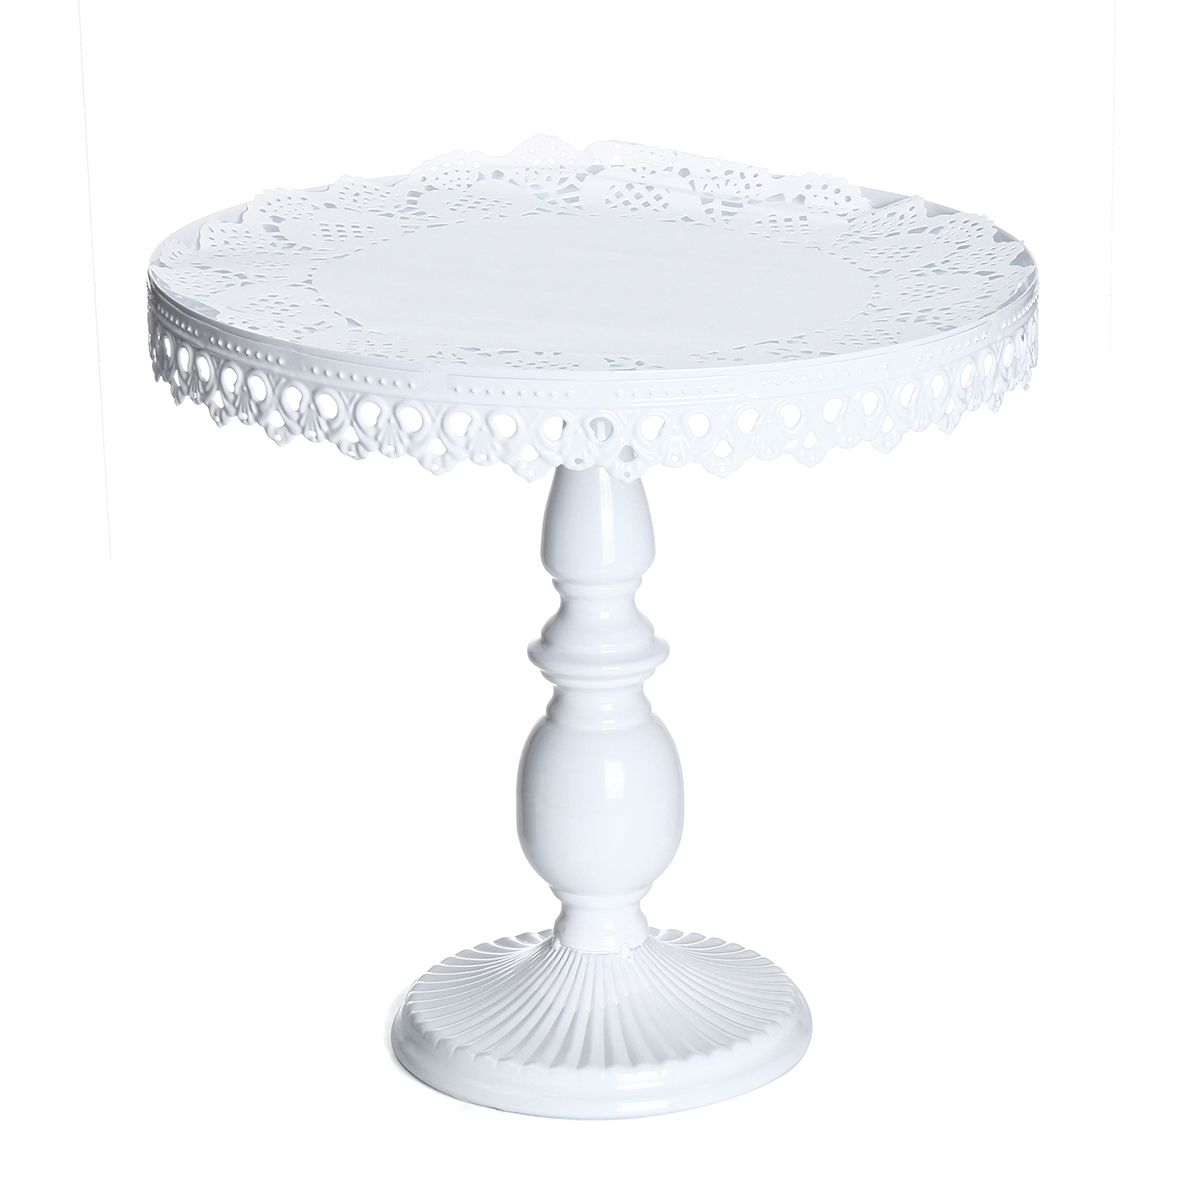 12pcsSet-Classical-European-style-Crystal-White-Metal-Cake-Cup-Holder-Cupcake-Stand-Wedding-Display-1525188